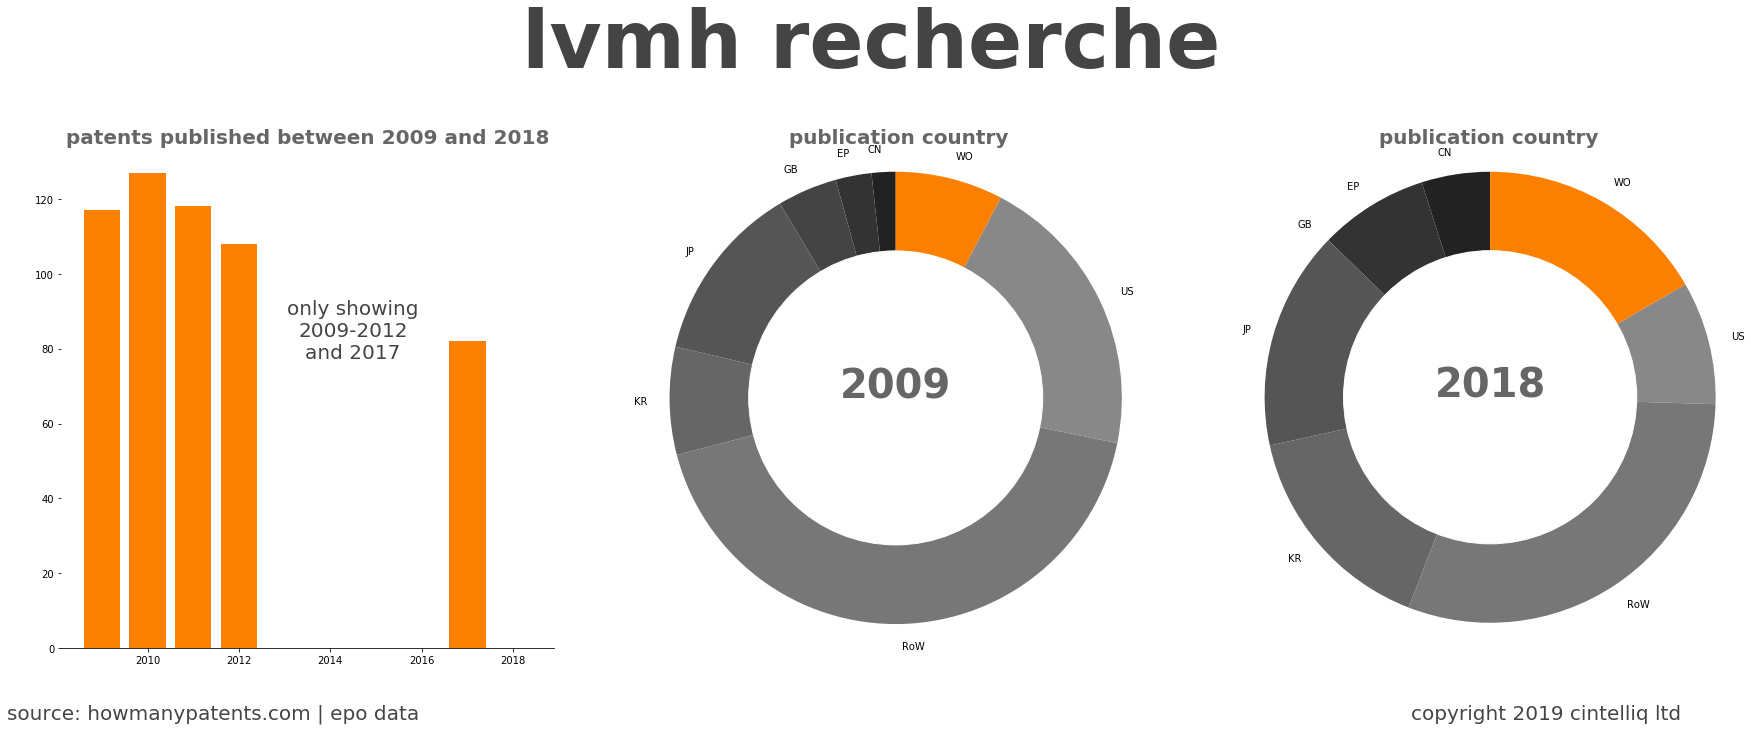 summary of patents for Lvmh Recherche